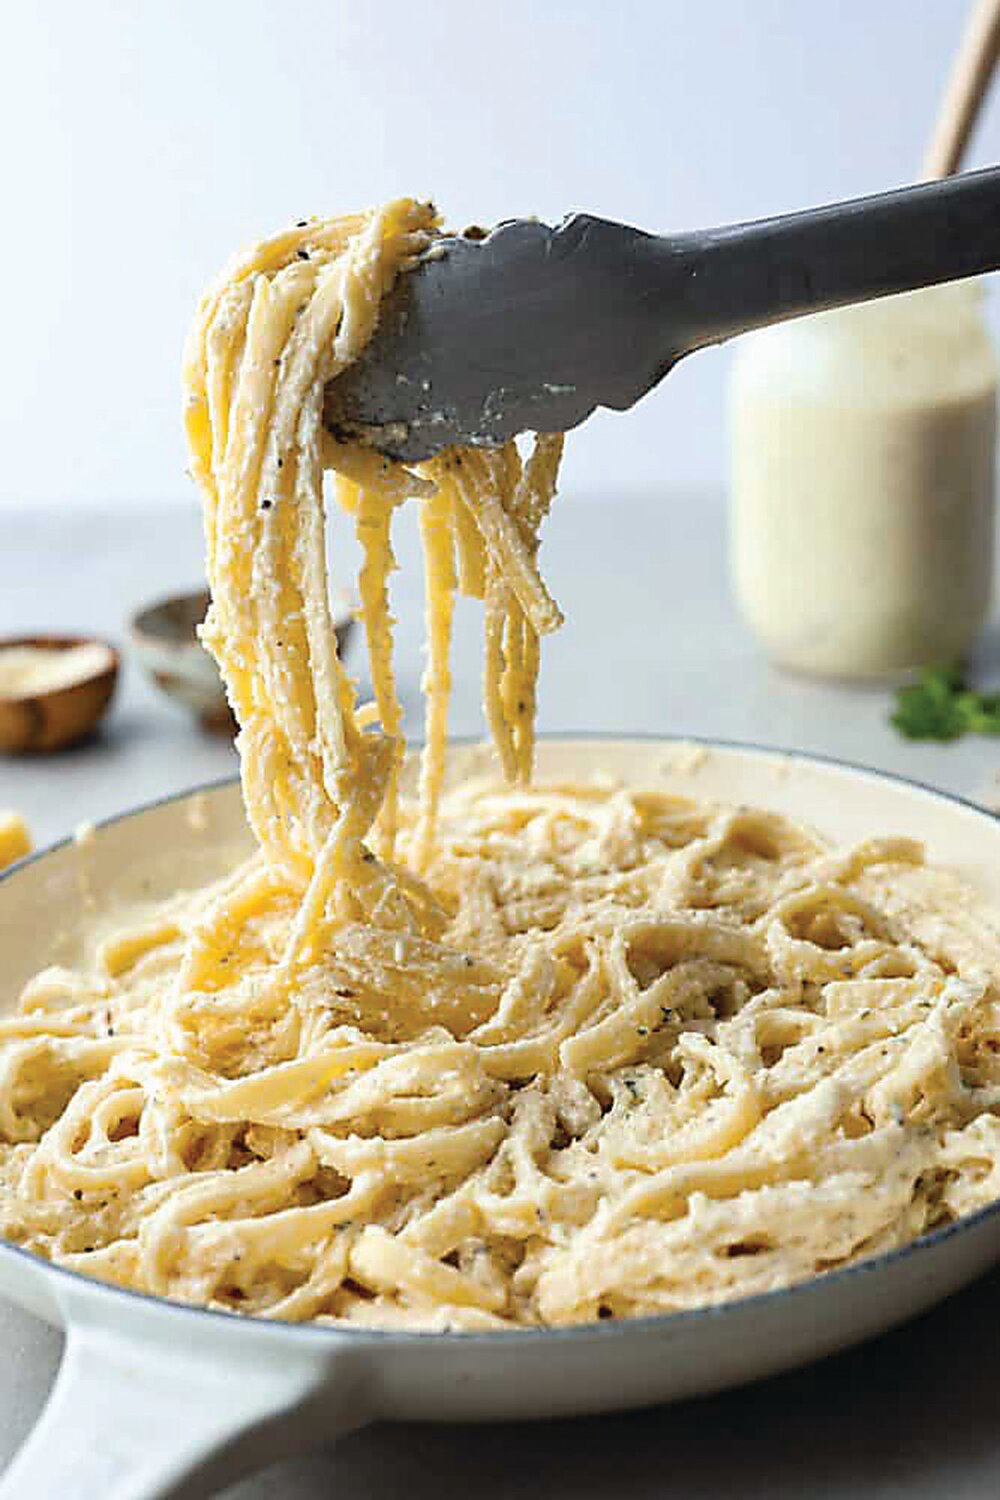 Celebrate National Dairy Month with your favorite dairy-based dishes such as this Alfredo sauce, which includes four dairy products.